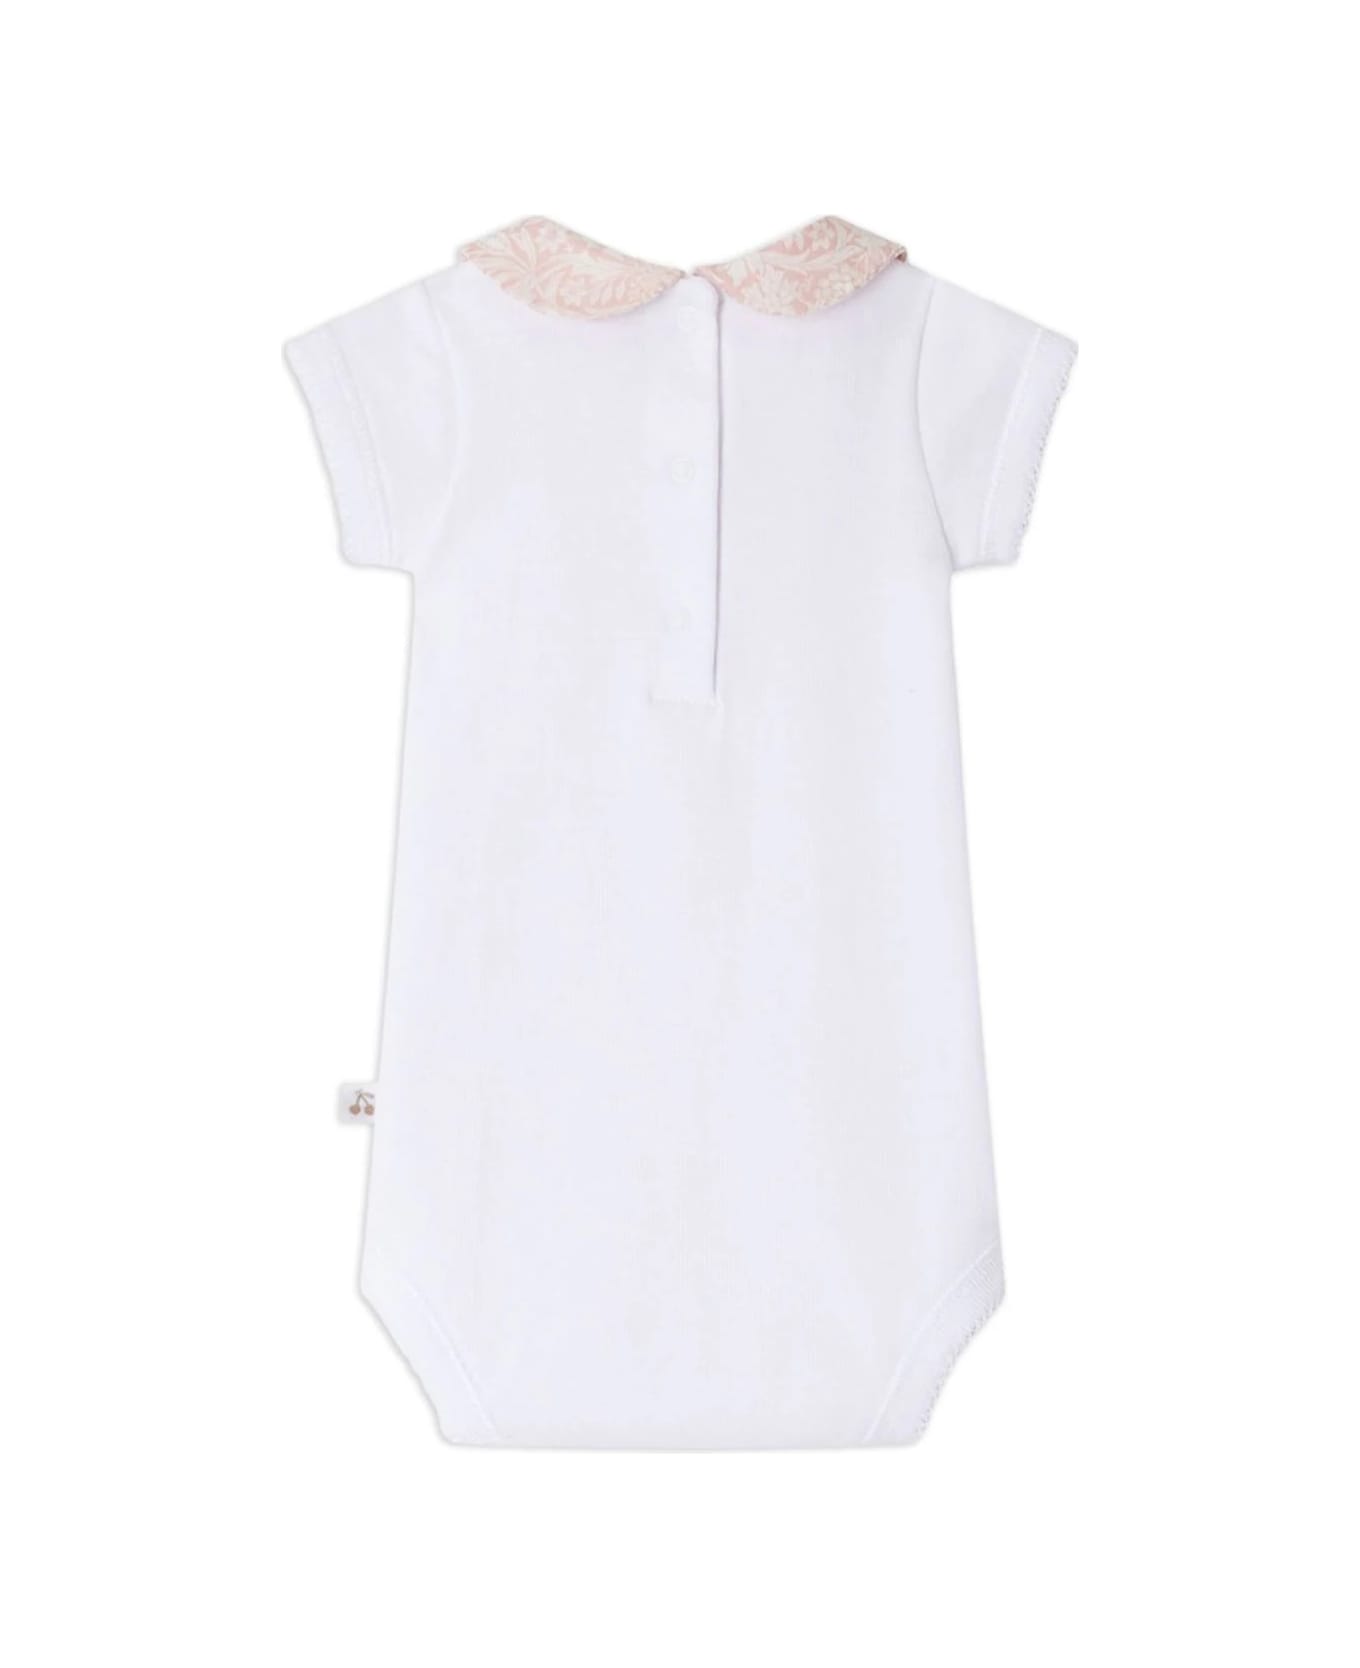 Bonpoint White And Pale Pink Calix Bodysuit - White